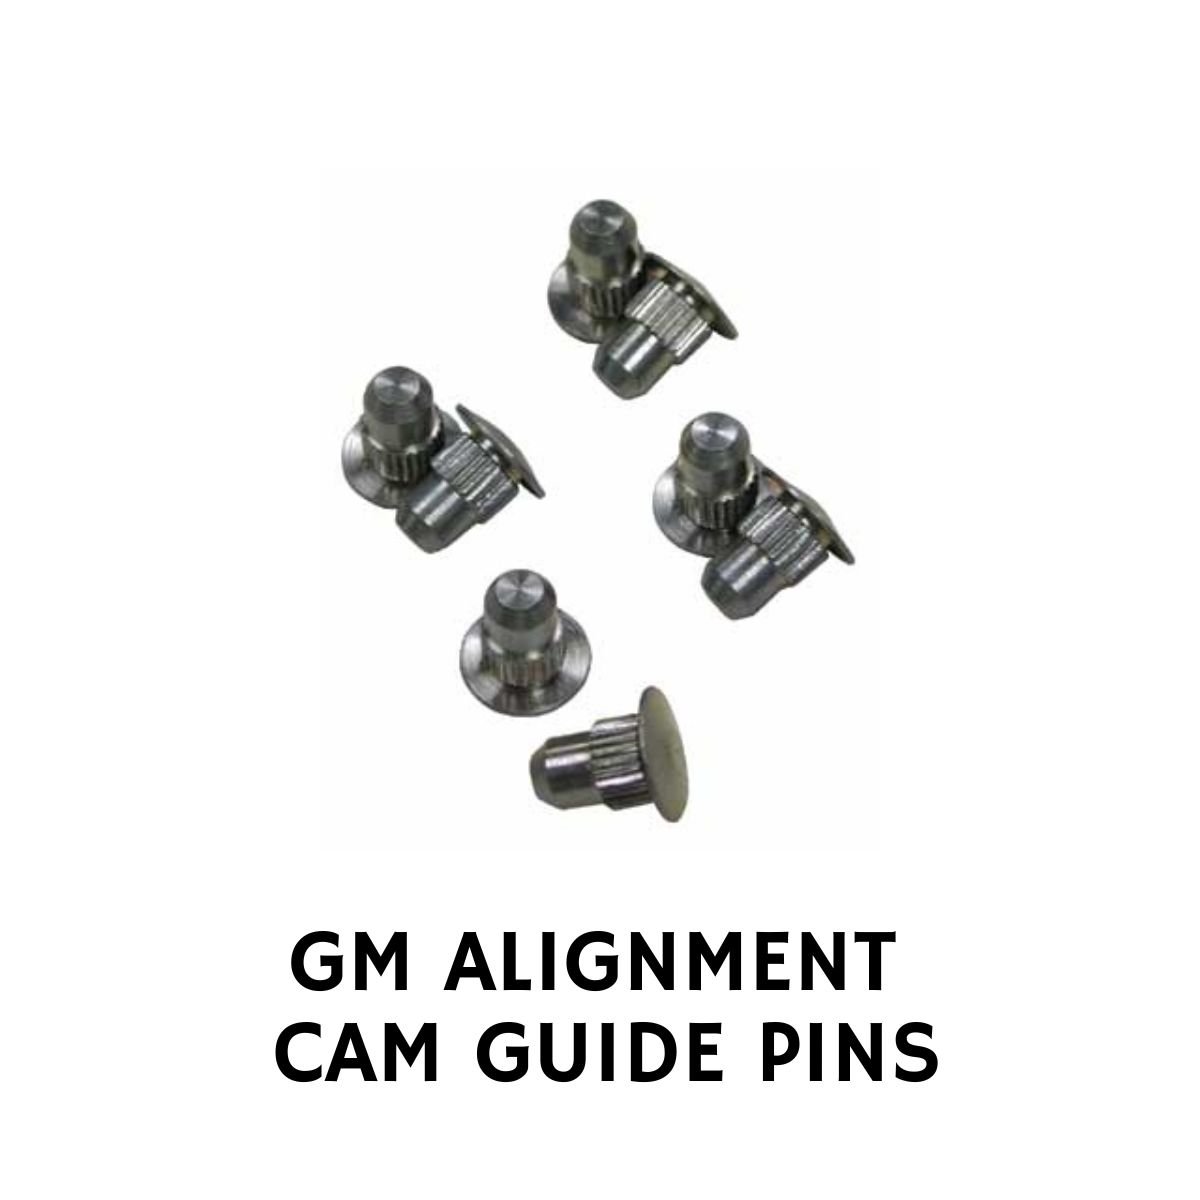 GM ALIGNMENT CAM GUIDE PINS